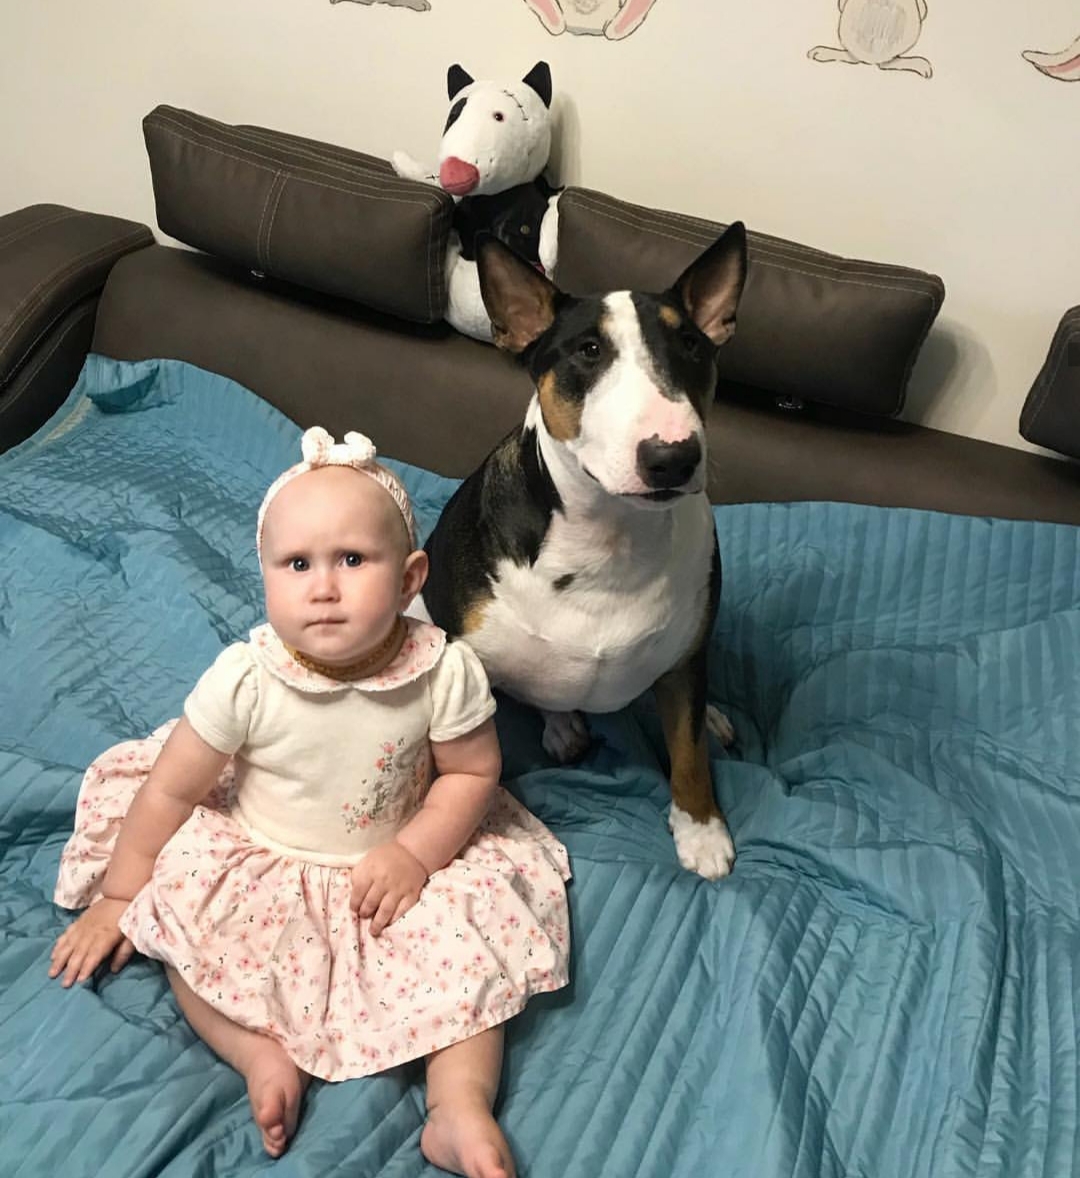 English Bull Terrier sitting on the bed with a kid